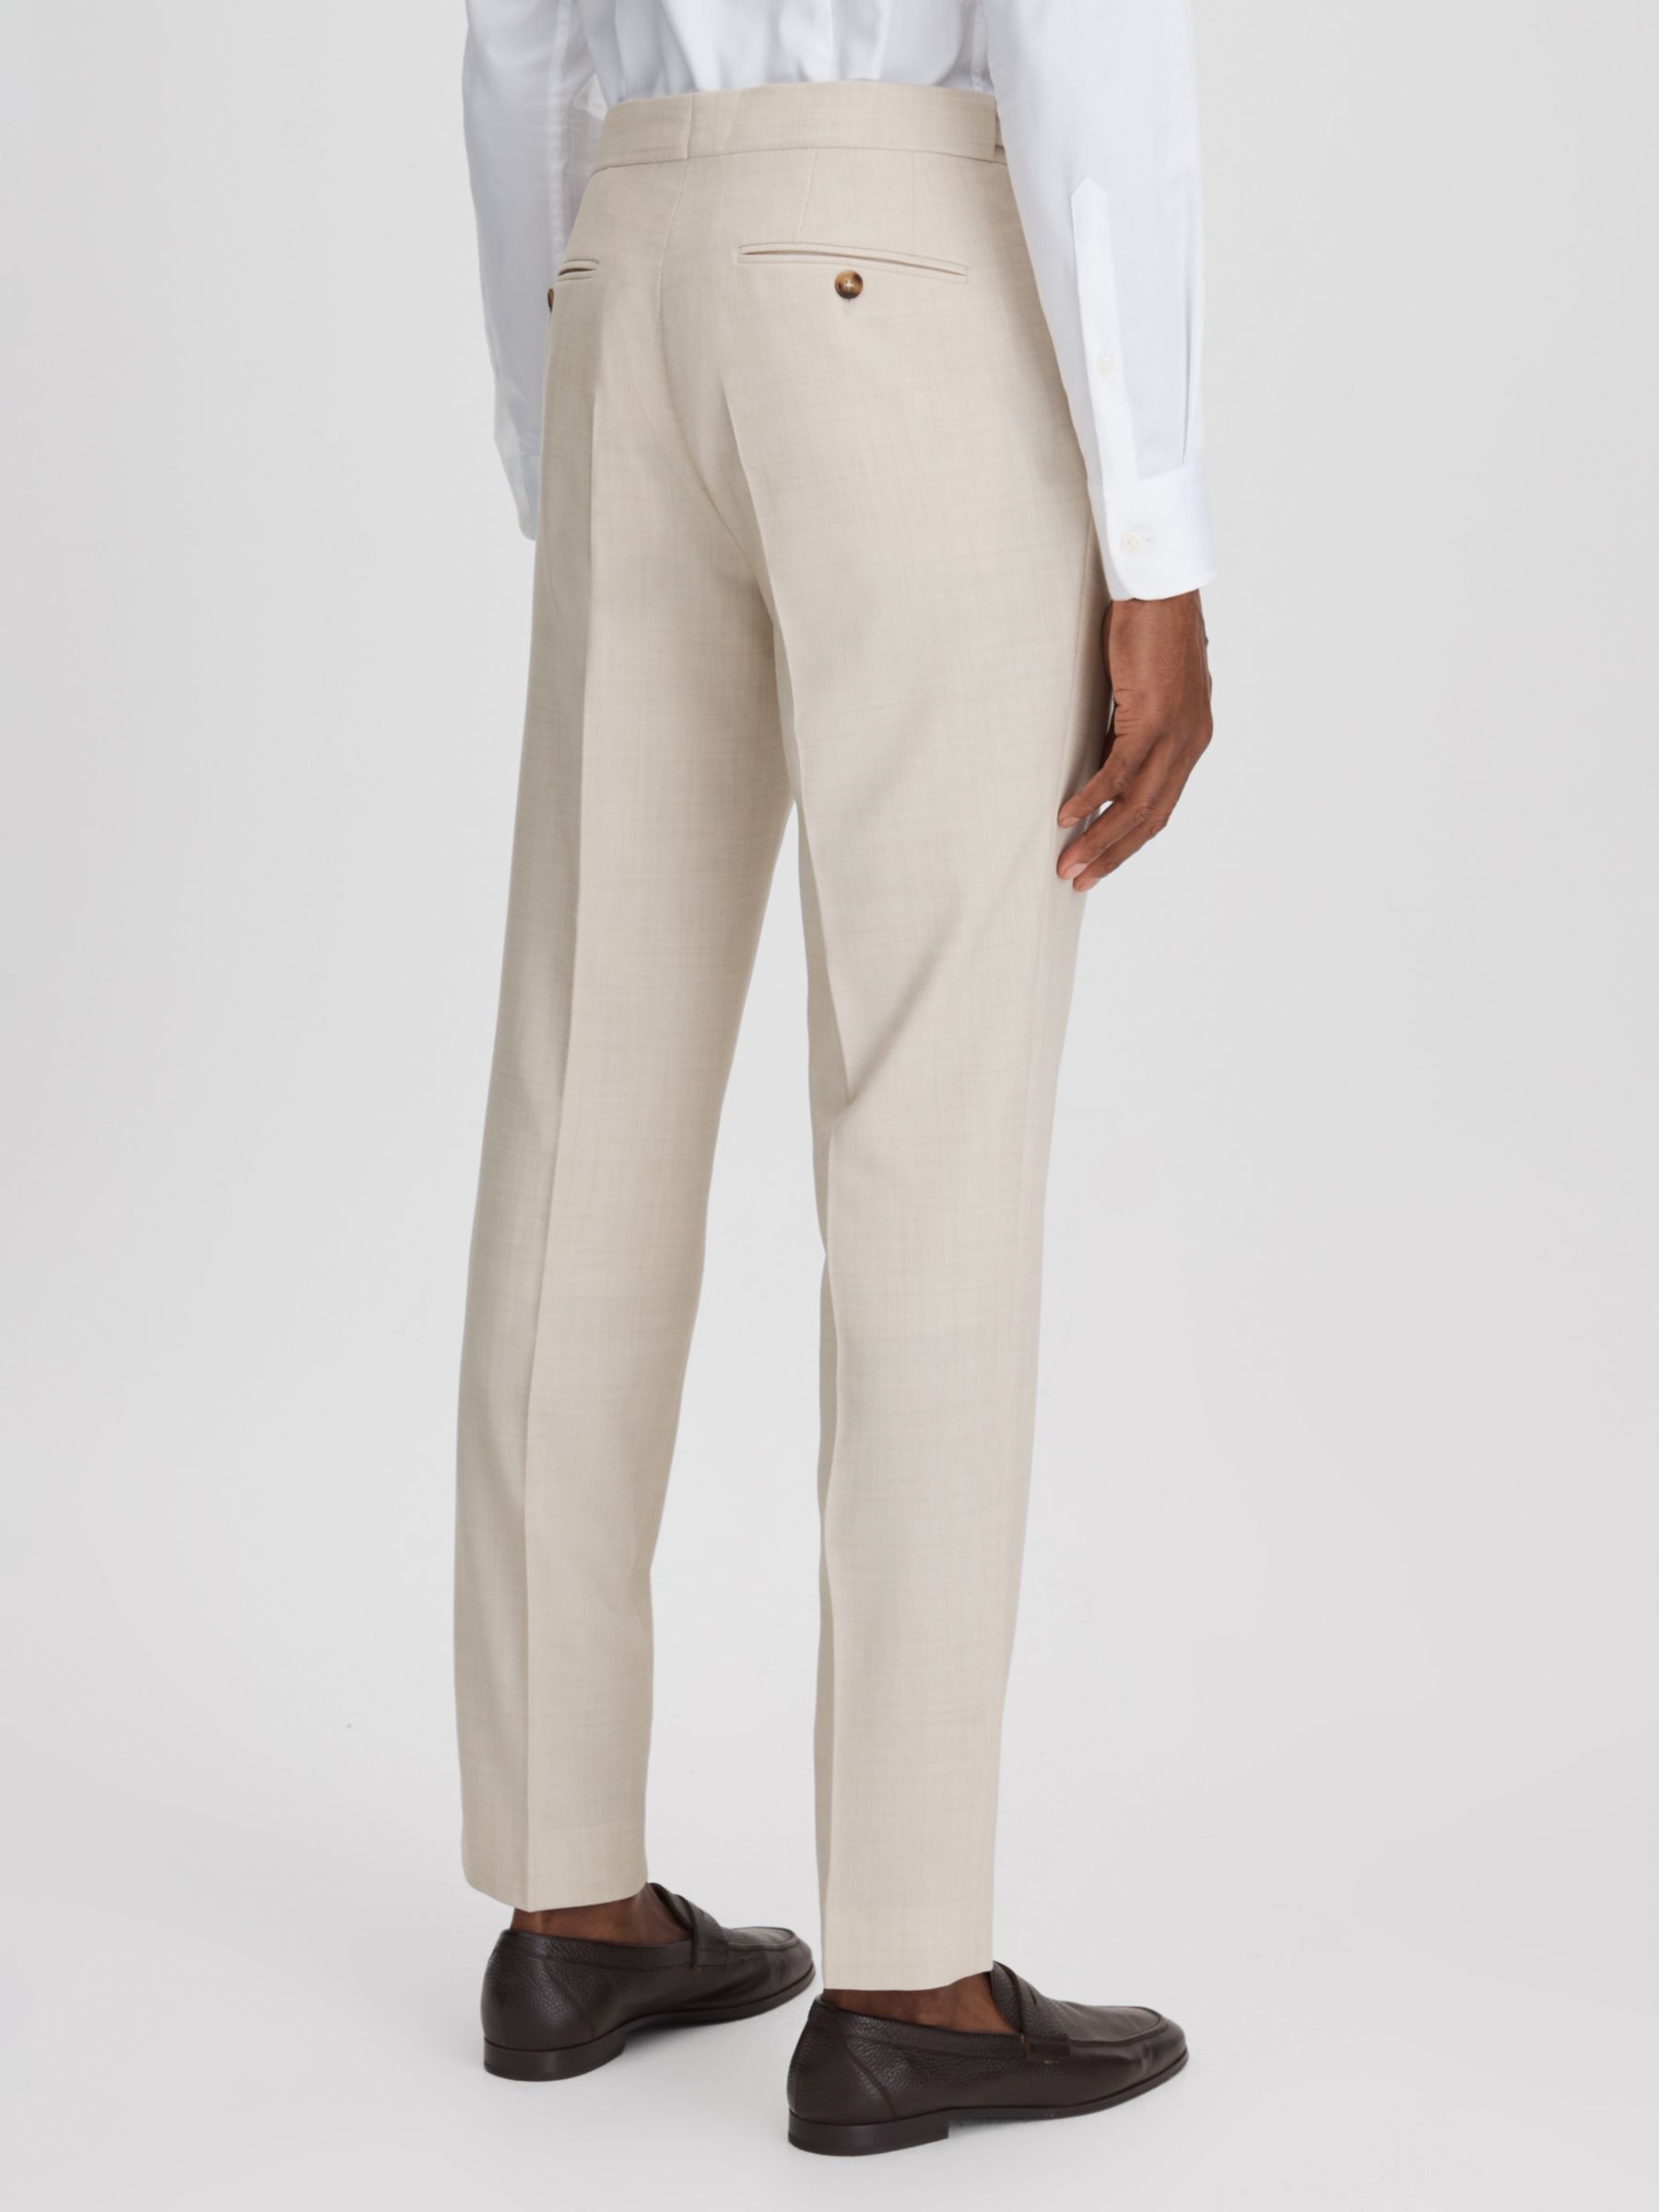 Buy Reiss Belmont Wool Blend Textured Weave Trousers, Stone Online at johnlewis.com